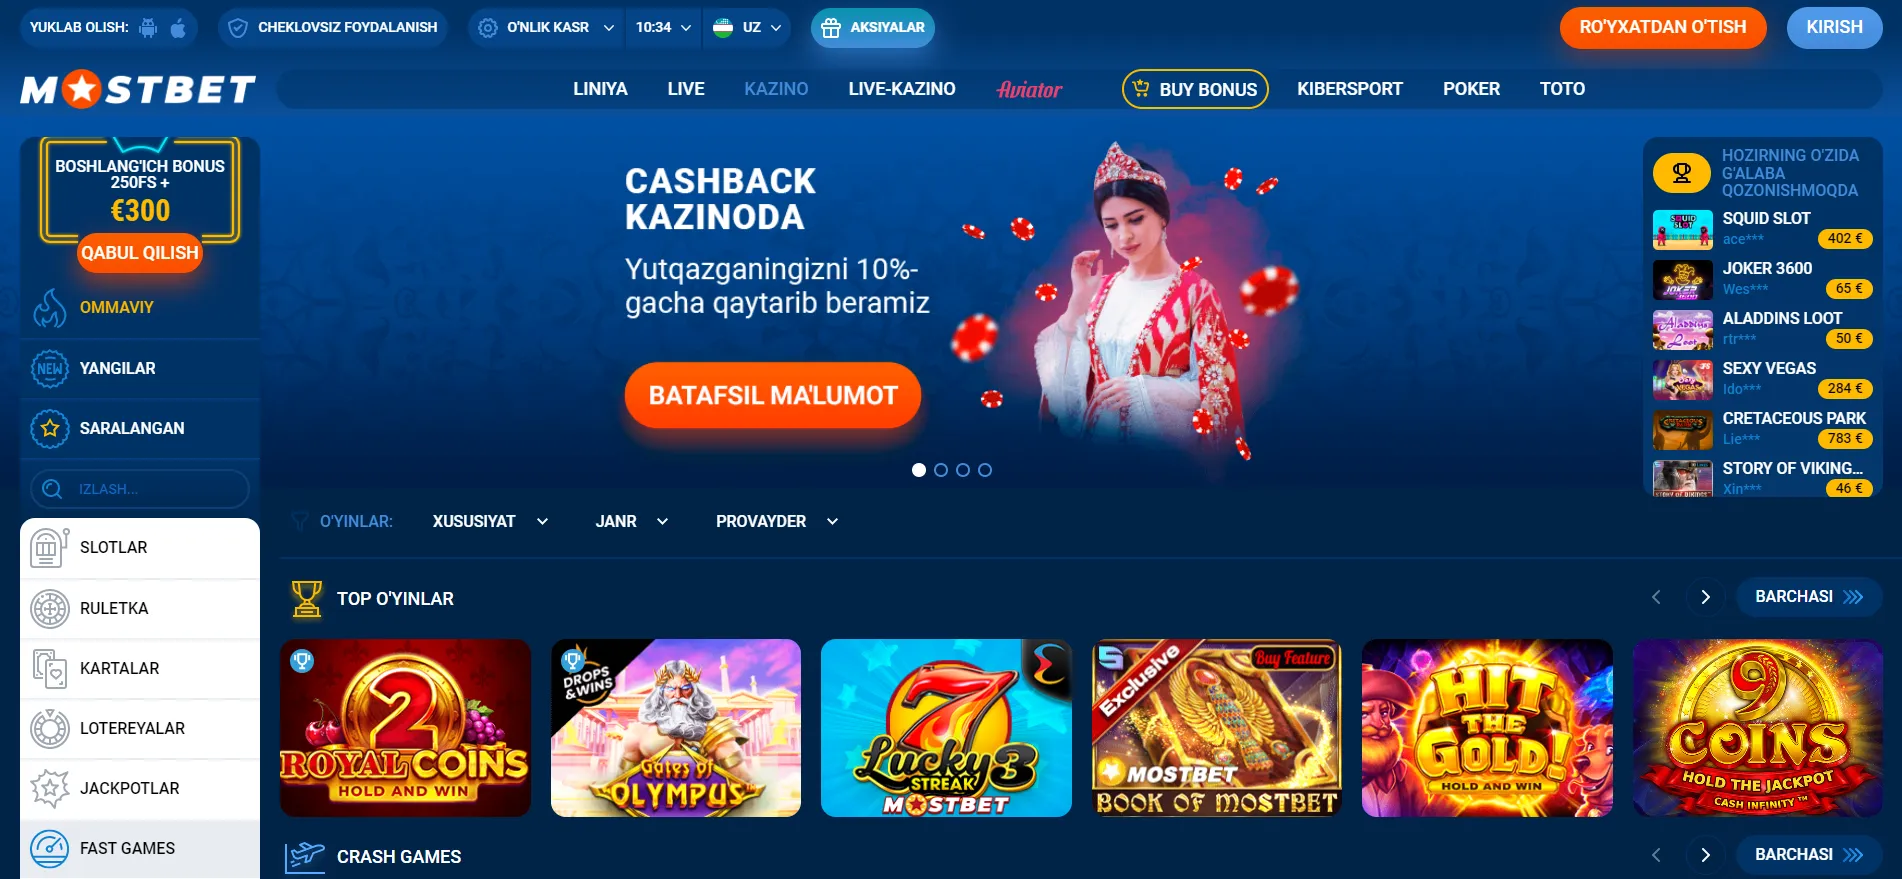 A Simple Plan For Mostbet UK: Get a signup bonus and more